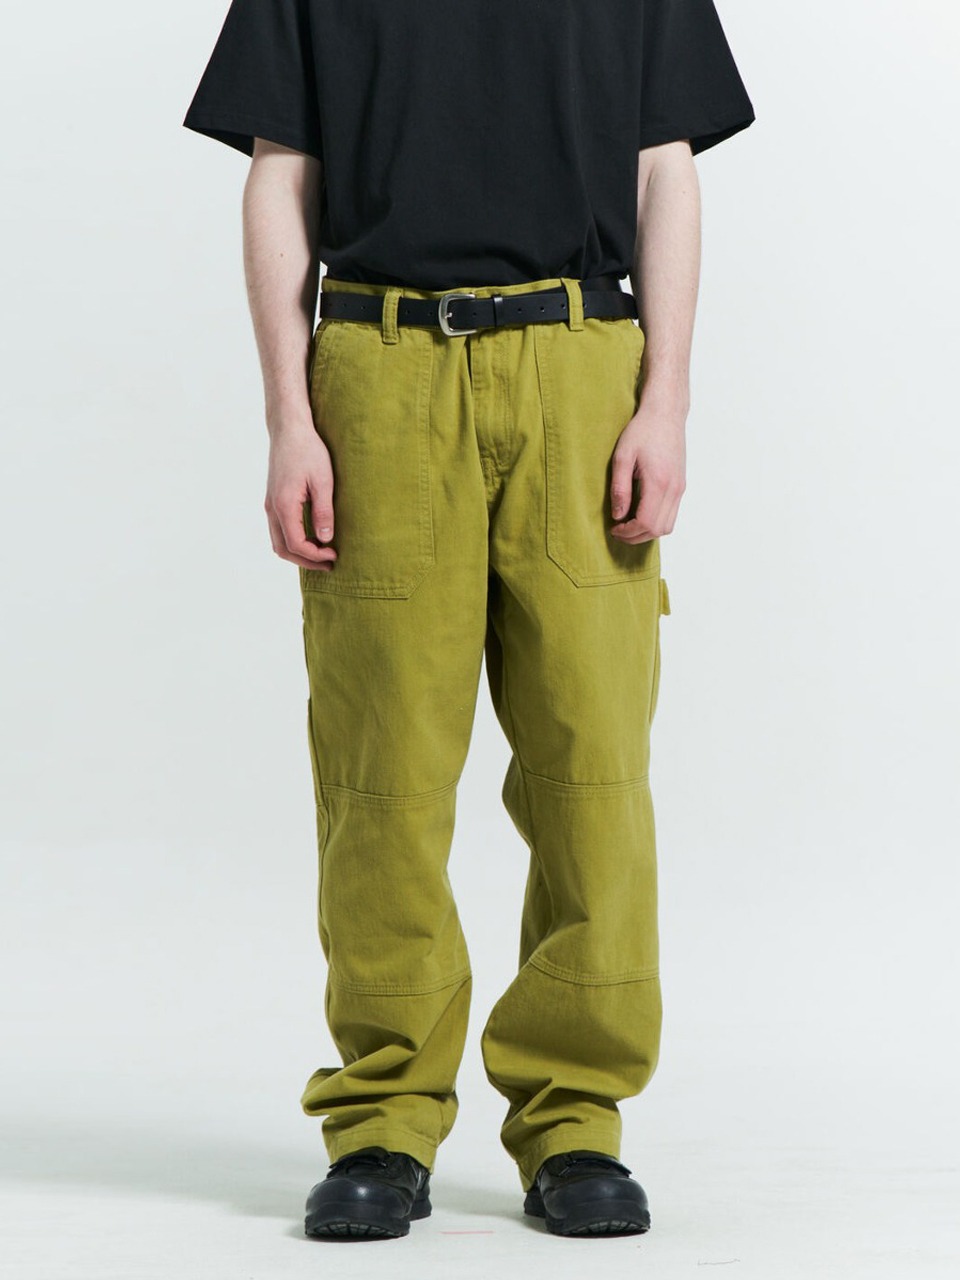 PLASTICPRODUCT - MPa SOFT CARPENTER PANTS (OLIVE)